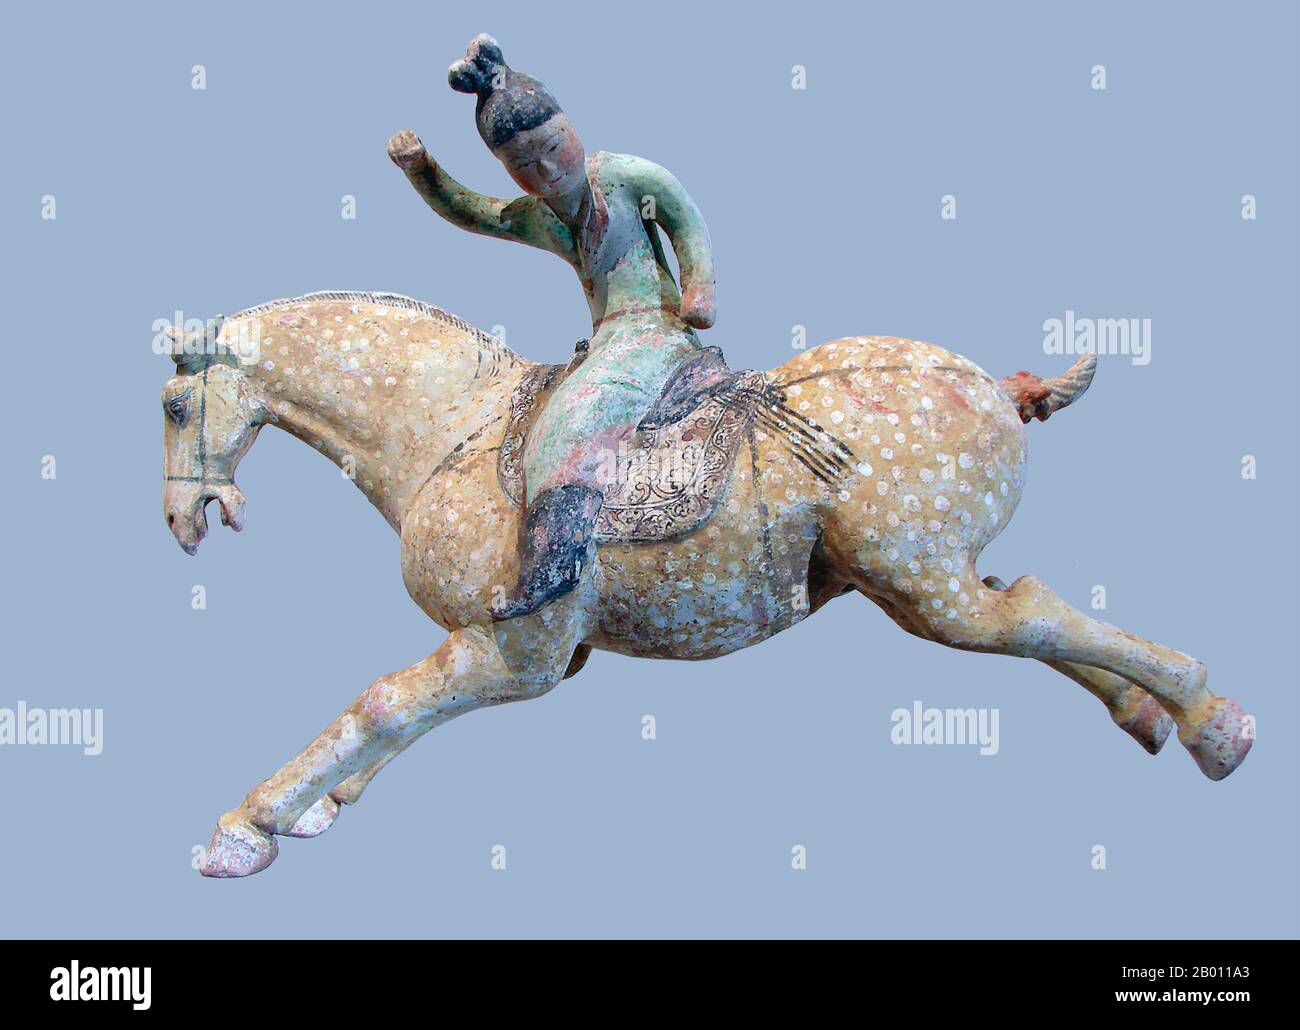 China: Tang dynasty ceramic horse with polo player, early 8th century.  The Tang Dynasty (Chinese: 唐朝; pinyin: Táng Cháo; June 18, 618 – June 1, 907) was an imperial dynasty of China preceded by the Sui Dynasty and followed by the Five Dynasties and Ten Kingdoms Period. It was founded by the Li (李) family, who seized power during the decline and collapse of the Sui Empire. The dynasty was interrupted briefly by the Second Zhou Dynasty (October 8, 690 – March 3, 705) when Empress Wu Zetian seized the throne, becoming the first and only Chinese empress regnant, ruling in her own right. Stock Photo